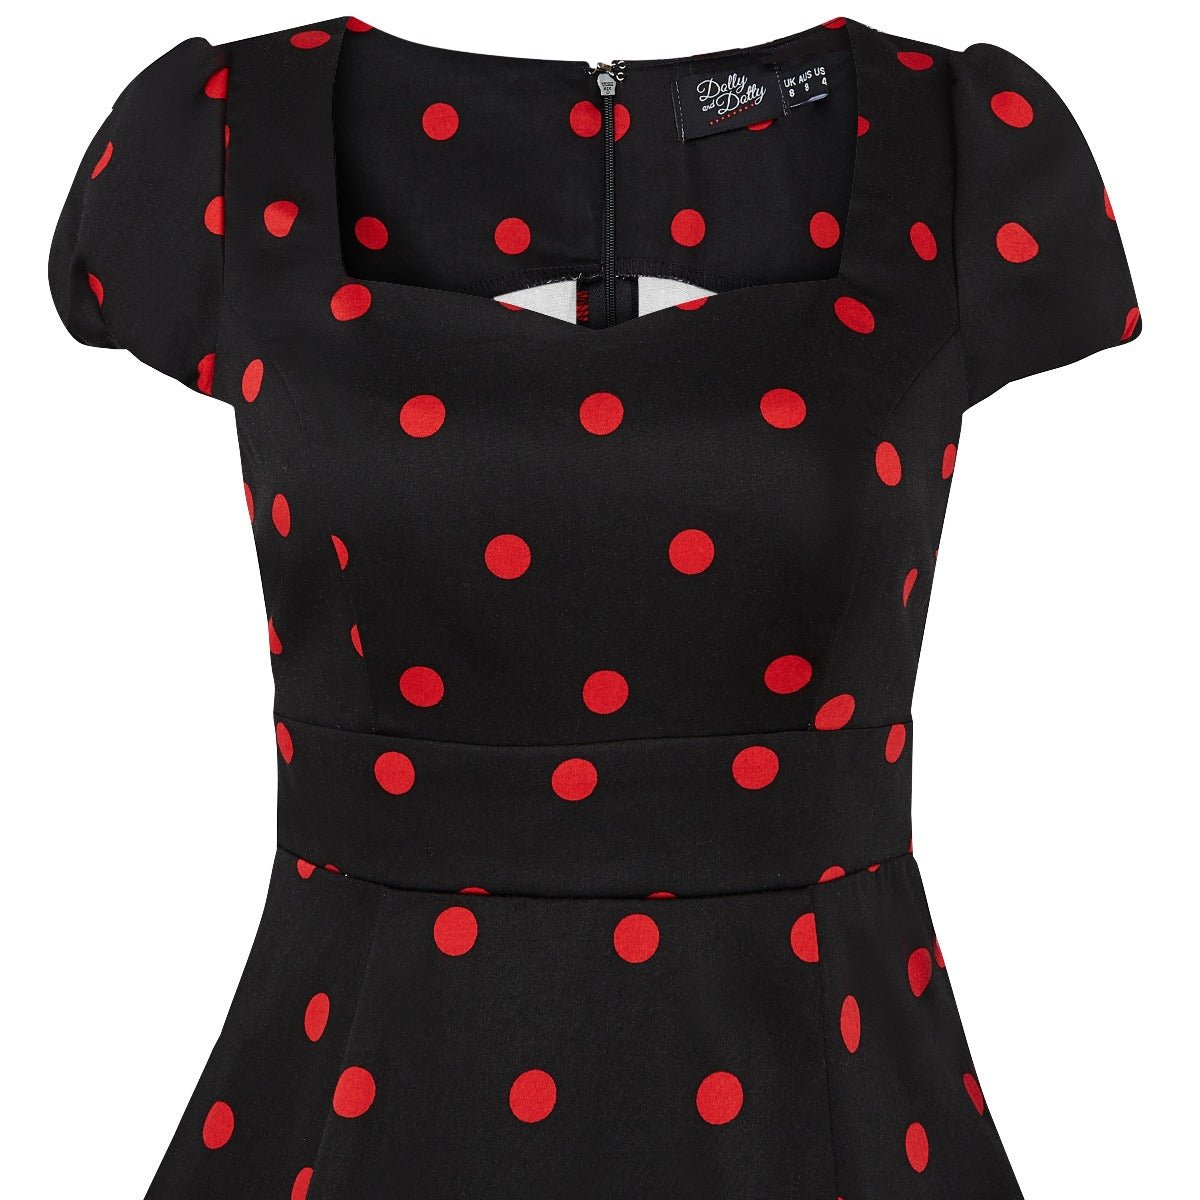 Claudia cap sleeve dress in black, with red polka dots, close up view